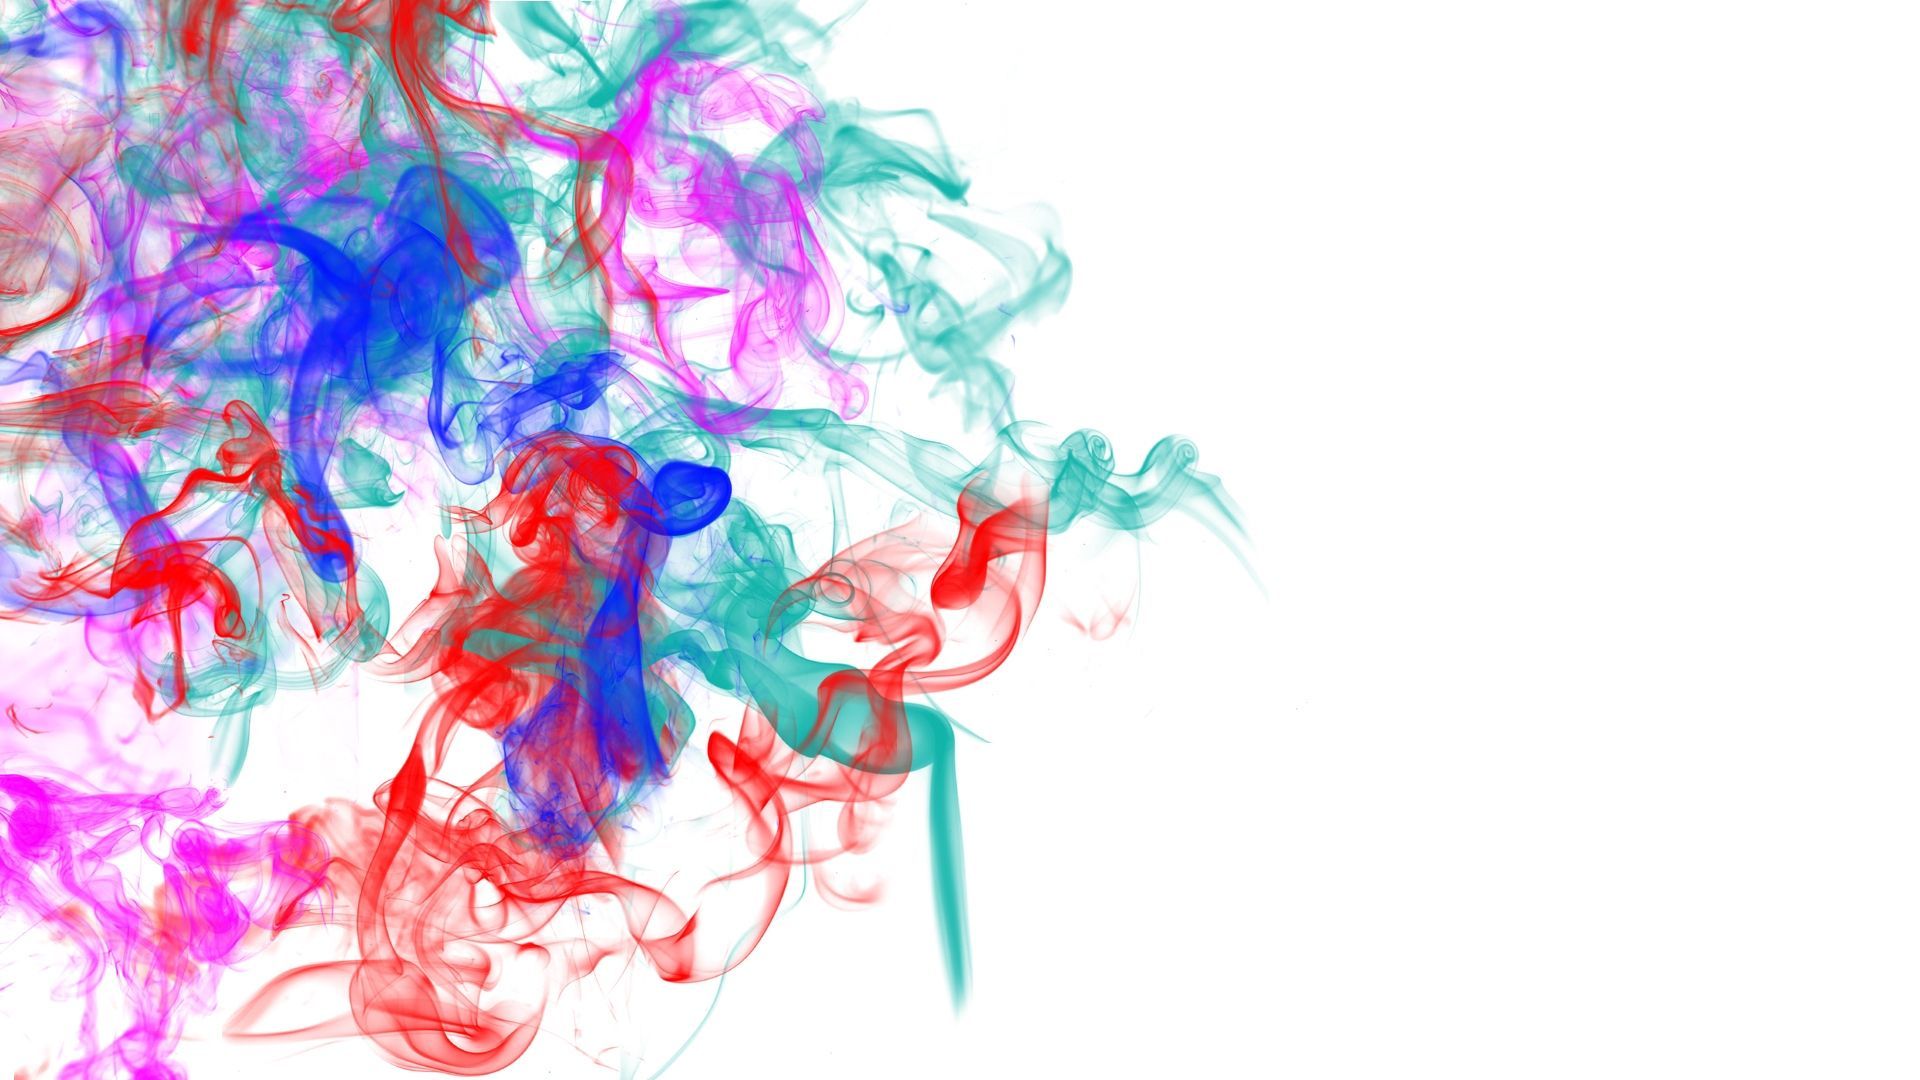 Download Wallpaper 1920x1080 Smoke, Patterns, Lines, Colorful Full